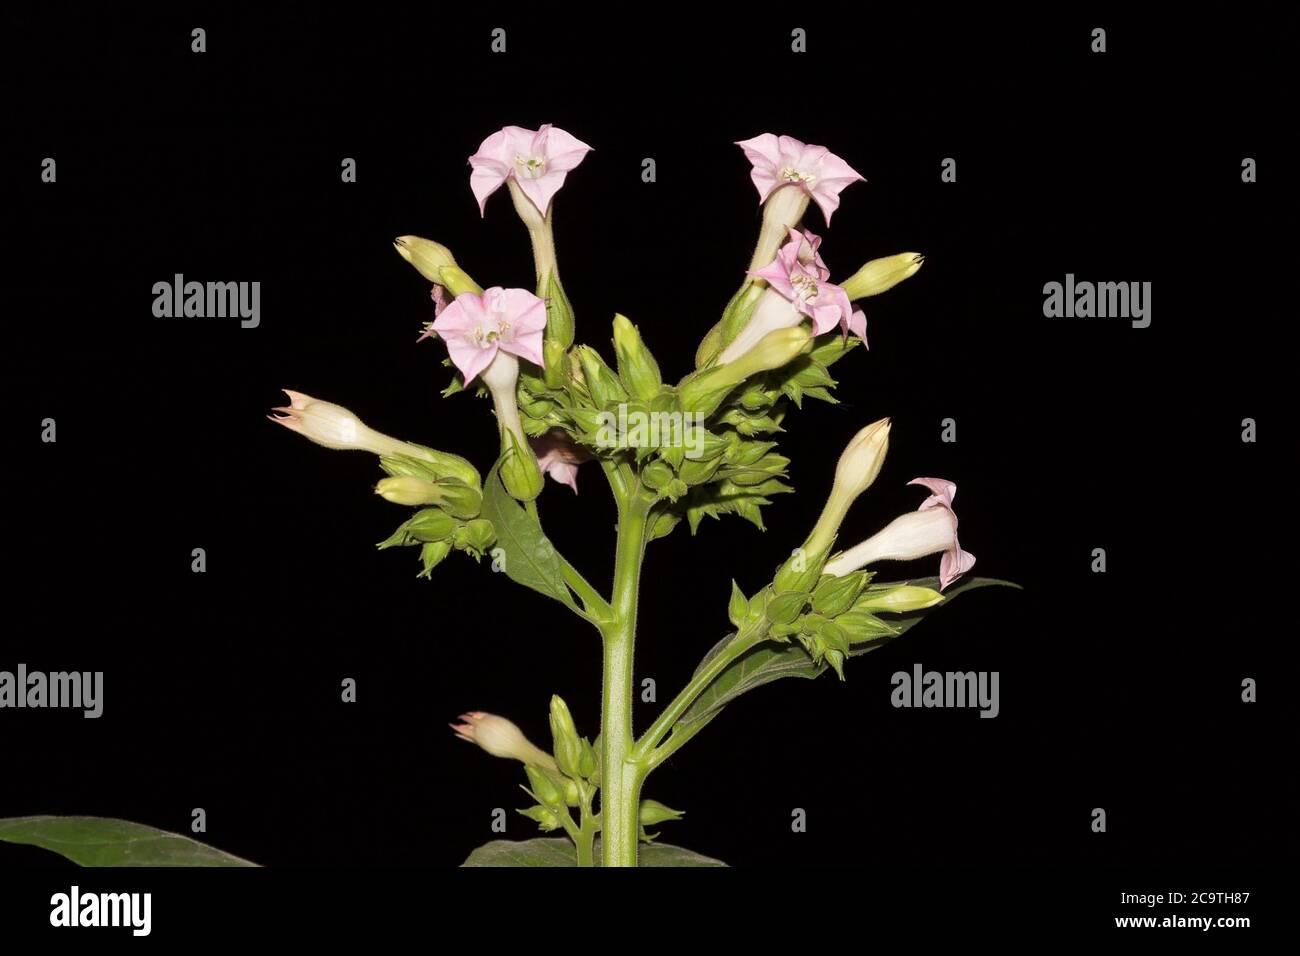 Blossoms of the tobacco plant Nicotiana tabacum Stock Photo